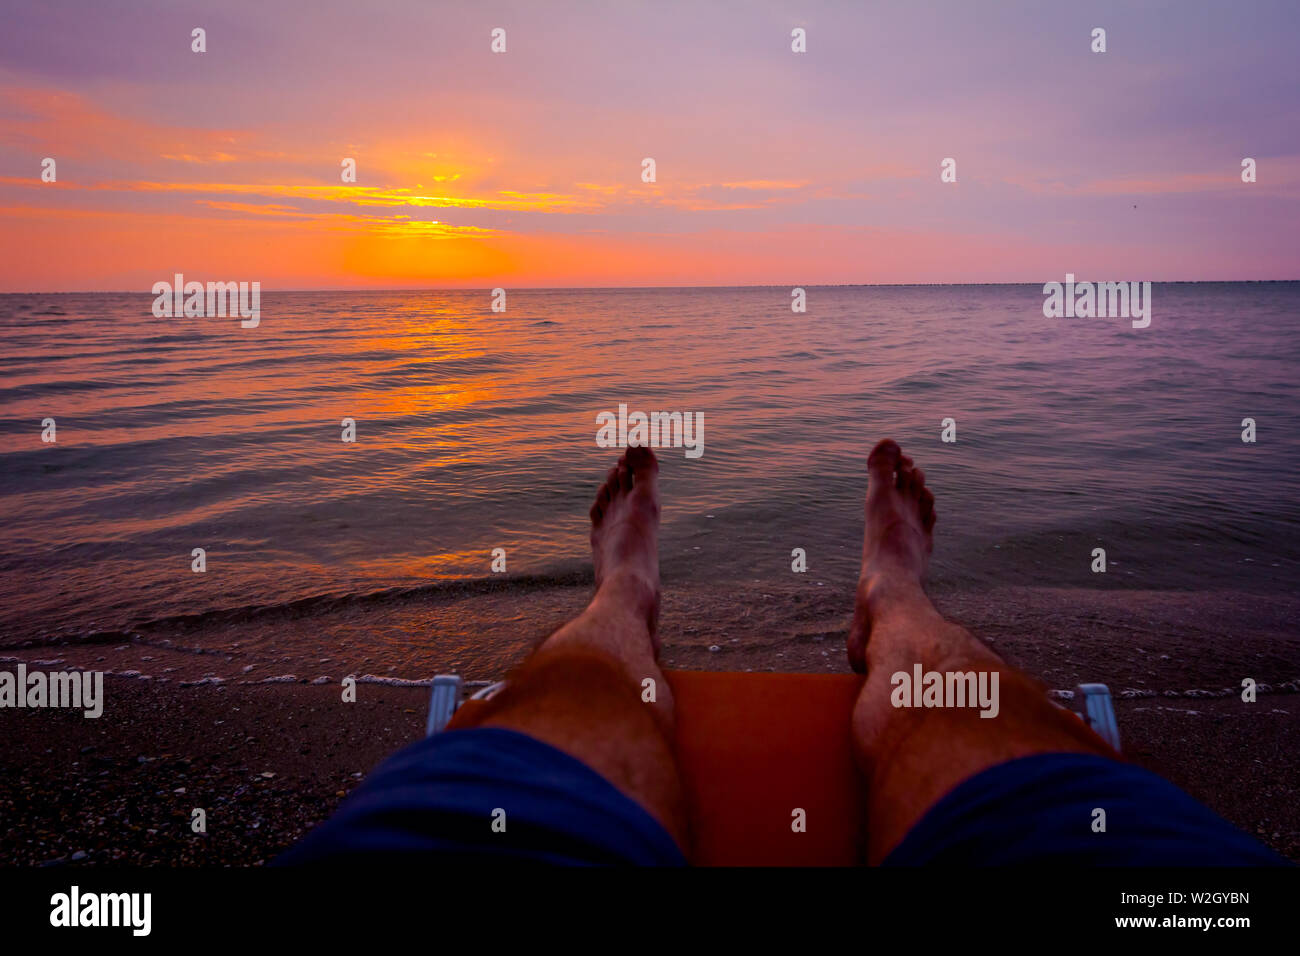 Man's legs until is sunbathing by lying carefree in lounger next to the coastline, on public beach. Stock Photo